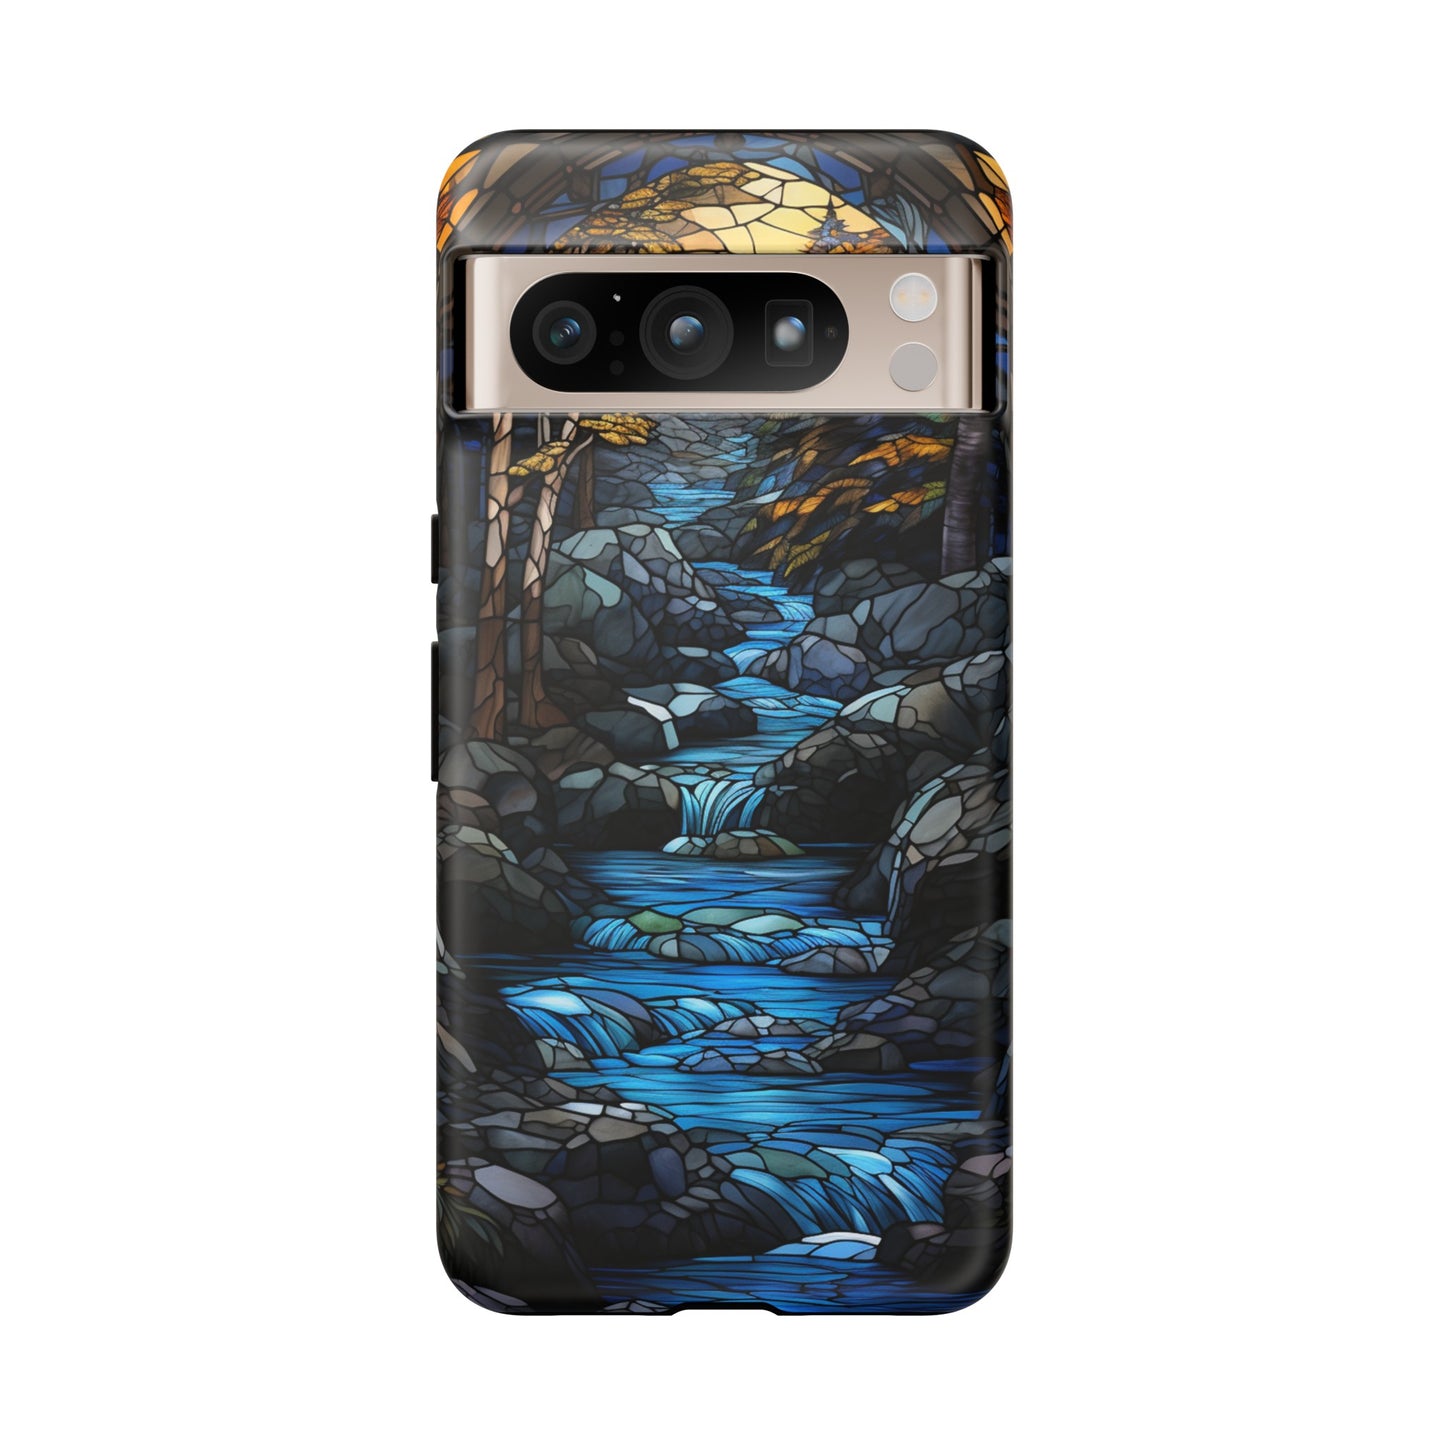 stained glass river phone case for Google Pixel